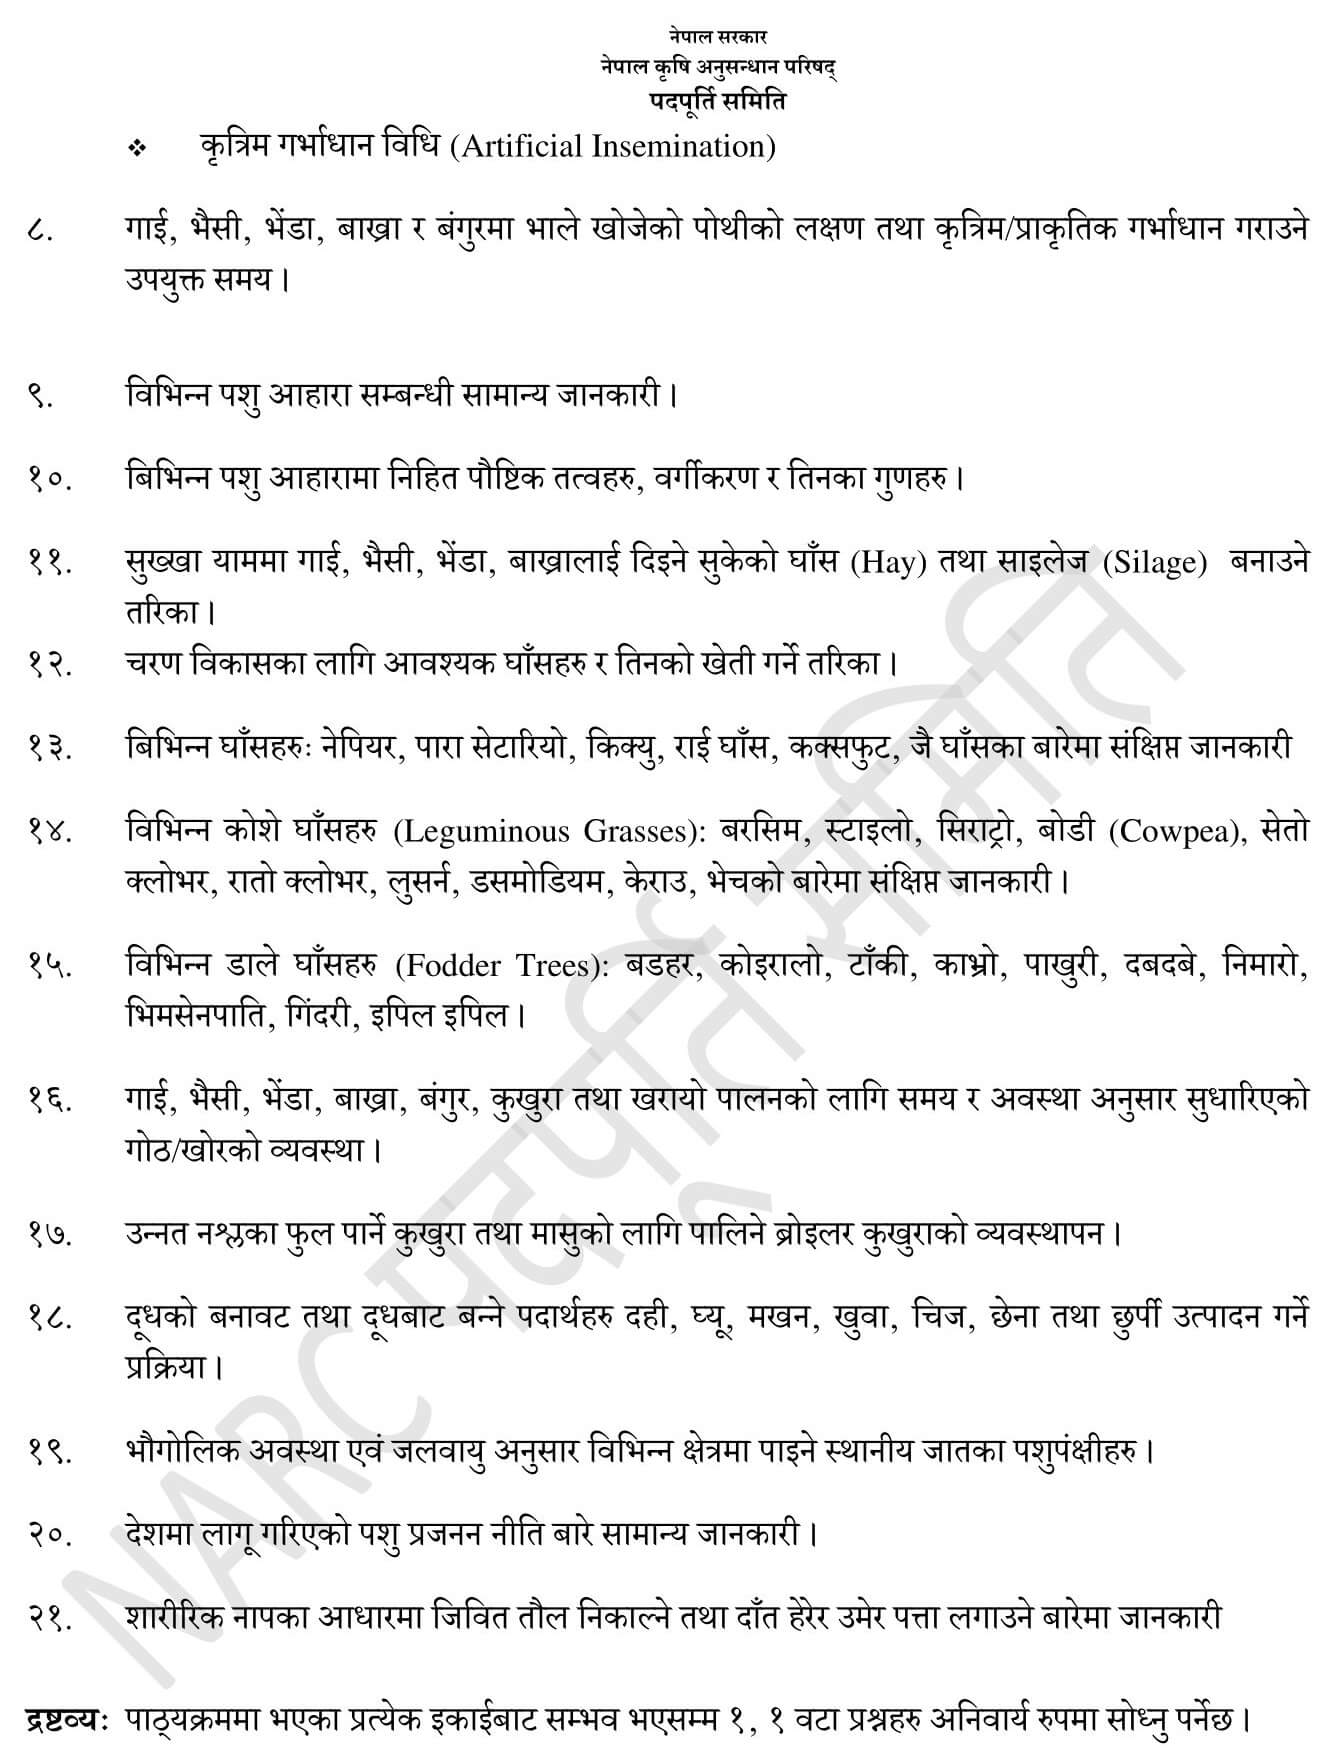 Nepal Agricultural Research Council Level 4 Technical Assistant Syllabus. NARC Level 4 Technical Assistant Syllabus. NARC Syllabus PDF